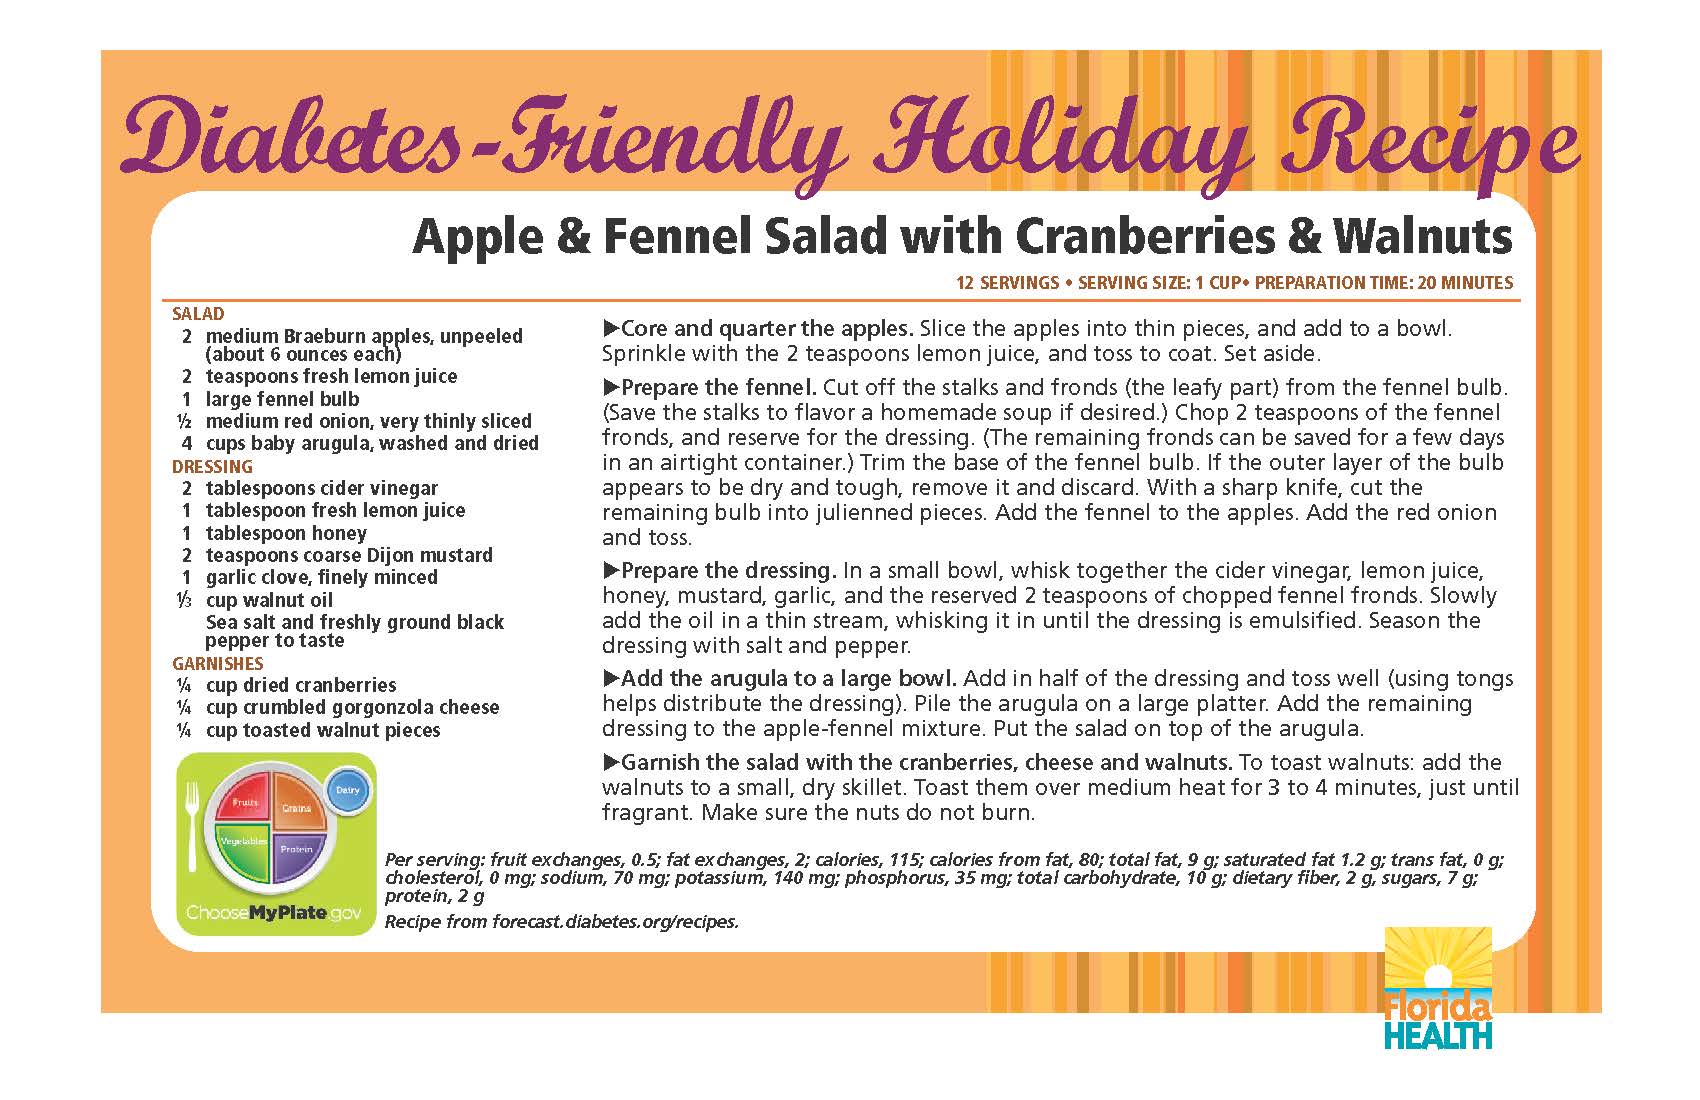 Diabetes-Friendly Holiday Recipe Apple & Fennel Salad with Cranberries & Walnuts 12 servings • serving size: 1 cup• preparation time: 20 minutes salaD 2 medium Braeburn apples, unpeeled (about 6 ounces each) 2 teaspoons fresh lemon juice 1 large fennel bulb ½ medium red onion, very thinly sliced 4 cups baby arugula, washed and dried Dressing 2 tablespoons cider vinegar 1 tablespoon fresh lemon juice 1 tablespoon honey 2 teaspoons coarse Dijon mustard 1 garlic clove, finely minced 1⁄3 cup walnut oil sea salt and freshly ground black pepper to taste garnishes ¼ cup dried cranberries ¼ cup crumbled gorgonzola cheese ¼ cup toasted walnut pieces Core and quarter the apples. Slice the apples into thin pieces, and add to a bowl. Sprinkle with the 2 teaspoons lemon juice, and toss to coat. Set aside. Prepare the fennel. Cut off the stalks and fronds (the leafy part) from the fennel bulb. (Save the stalks to flavor a homemade soup if desired.) Chop 2 teaspoons of the fennel fronds, and reserve for the dressing. (The remaining fronds can be saved for a few days in an airtight container.) Trim the base of the fennel bulb. If the outer layer of the bulb appears to be dry and tough, remove it and discard. With a sharp knife, cut the remaining bulb into julienned pieces. Add the fennel to the apples. Add the red onion and toss. Prepare the dressing. In a small bowl, whisk together the cider vinegar, lemon juice, honey, mustard, garlic, and the reserved 2 teaspoons of chopped fennel fronds. Slowly add the oil in a thin stream, whisking it in until the dressing is emulsified. Season the dressing with salt and pepper. Add the arugula to a large bowl. Add in half of the dressing and toss well (using tongs helps distribute the dressing). Pile the arugula on a large platter. Add the remaining dressing to the apple-fennel mixture. Put the salad on top of the arugula. Garnish the salad with the cranberries, cheese and walnuts. To toast walnuts: add the walnuts to a small, dry skillet. Toast them over medium heat for 3 to 4 minutes, just until fragrant. Make sure the nuts do not burn. Apple & Fennel Salad with Cranberries & Walnuts 12 servings • serving size: 1 cup• preparation time: 20 minutes Per serving: fruit exchanges, 0.5; fat exchanges, 2; calories, 115; calories from fat, 80; total fat, 9 g; saturated fat 1.2 g; trans fat, 0 g; cholesterol, 0 mg; sodium, 70 mg; potassium, 140 mg; phosphorus, 35 mg; total carbohydrate, 10 g; dietary fiber, 2 g, sugars, 7 g; protein, 2 g Recipe from forecast.diabetes.org/recipes.